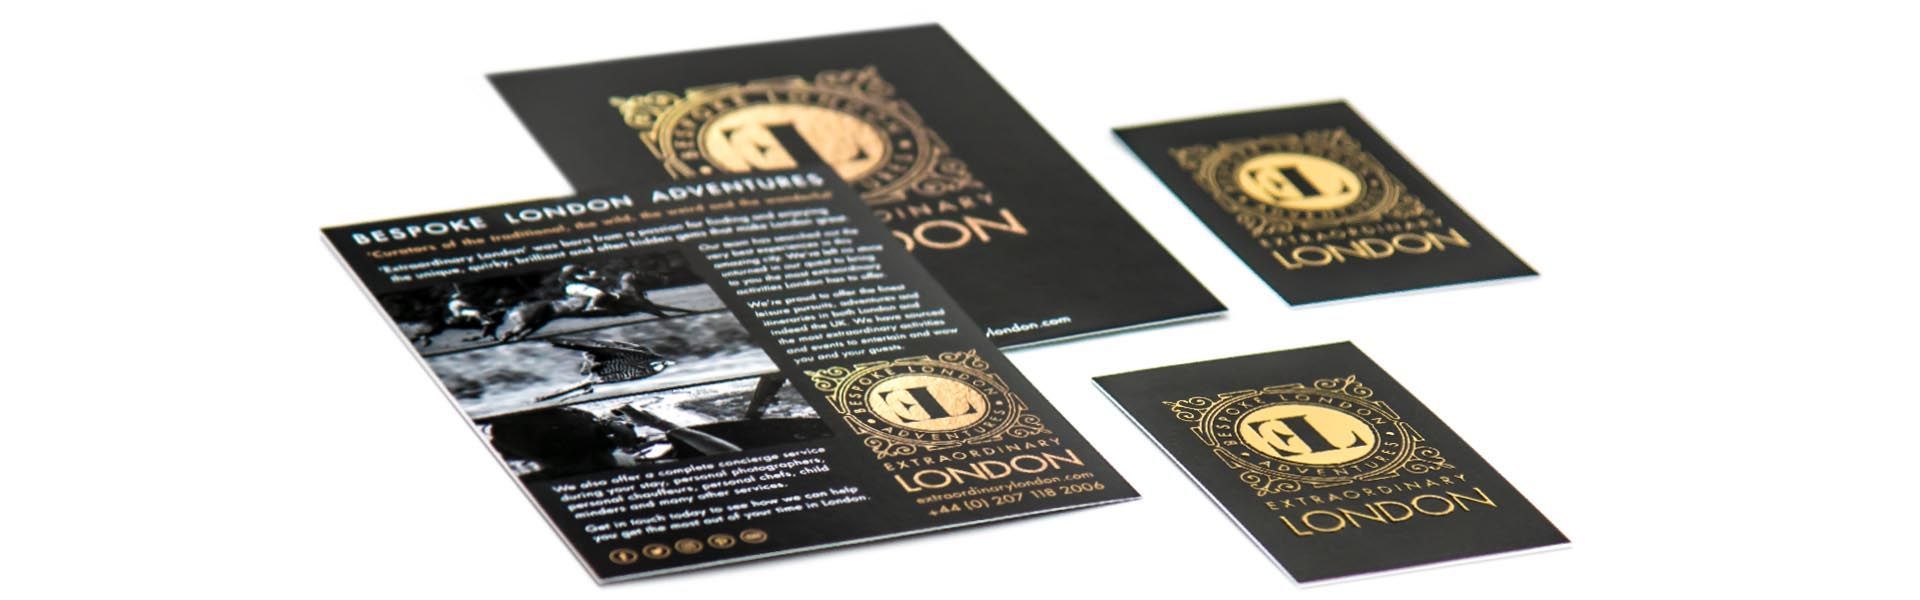 a black and gold brochure for bespoke london adventures